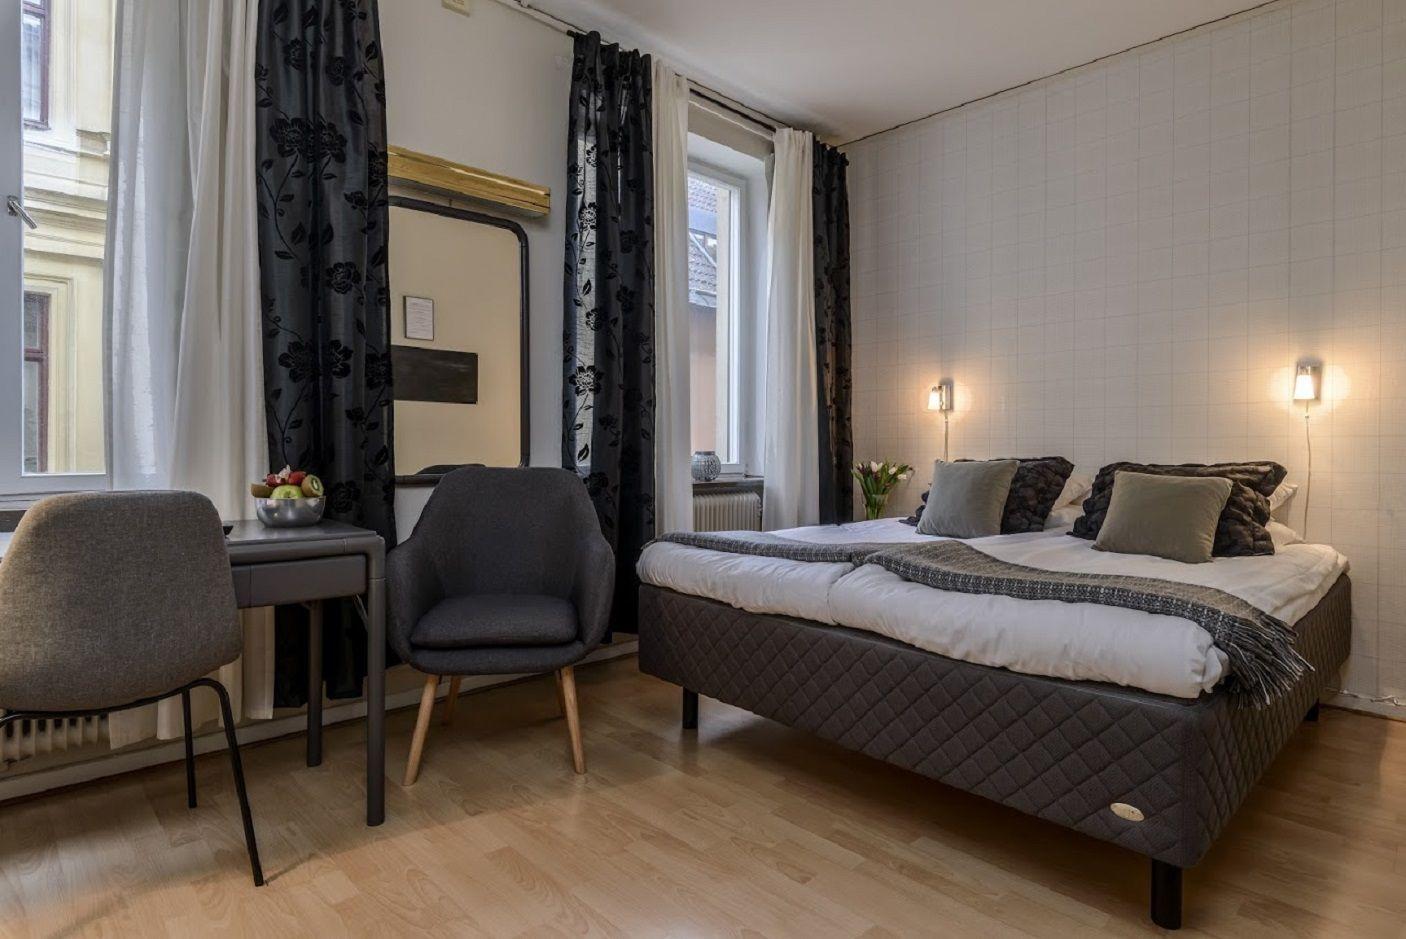 Double room incl. buffebreakfast - comfortably furnished with harmonious colors, sofa or armchairs, TV, Free WIFI. WC / shower. All rooms are fitted with beds from DUX®. Extra bed is available for a third person in this room.